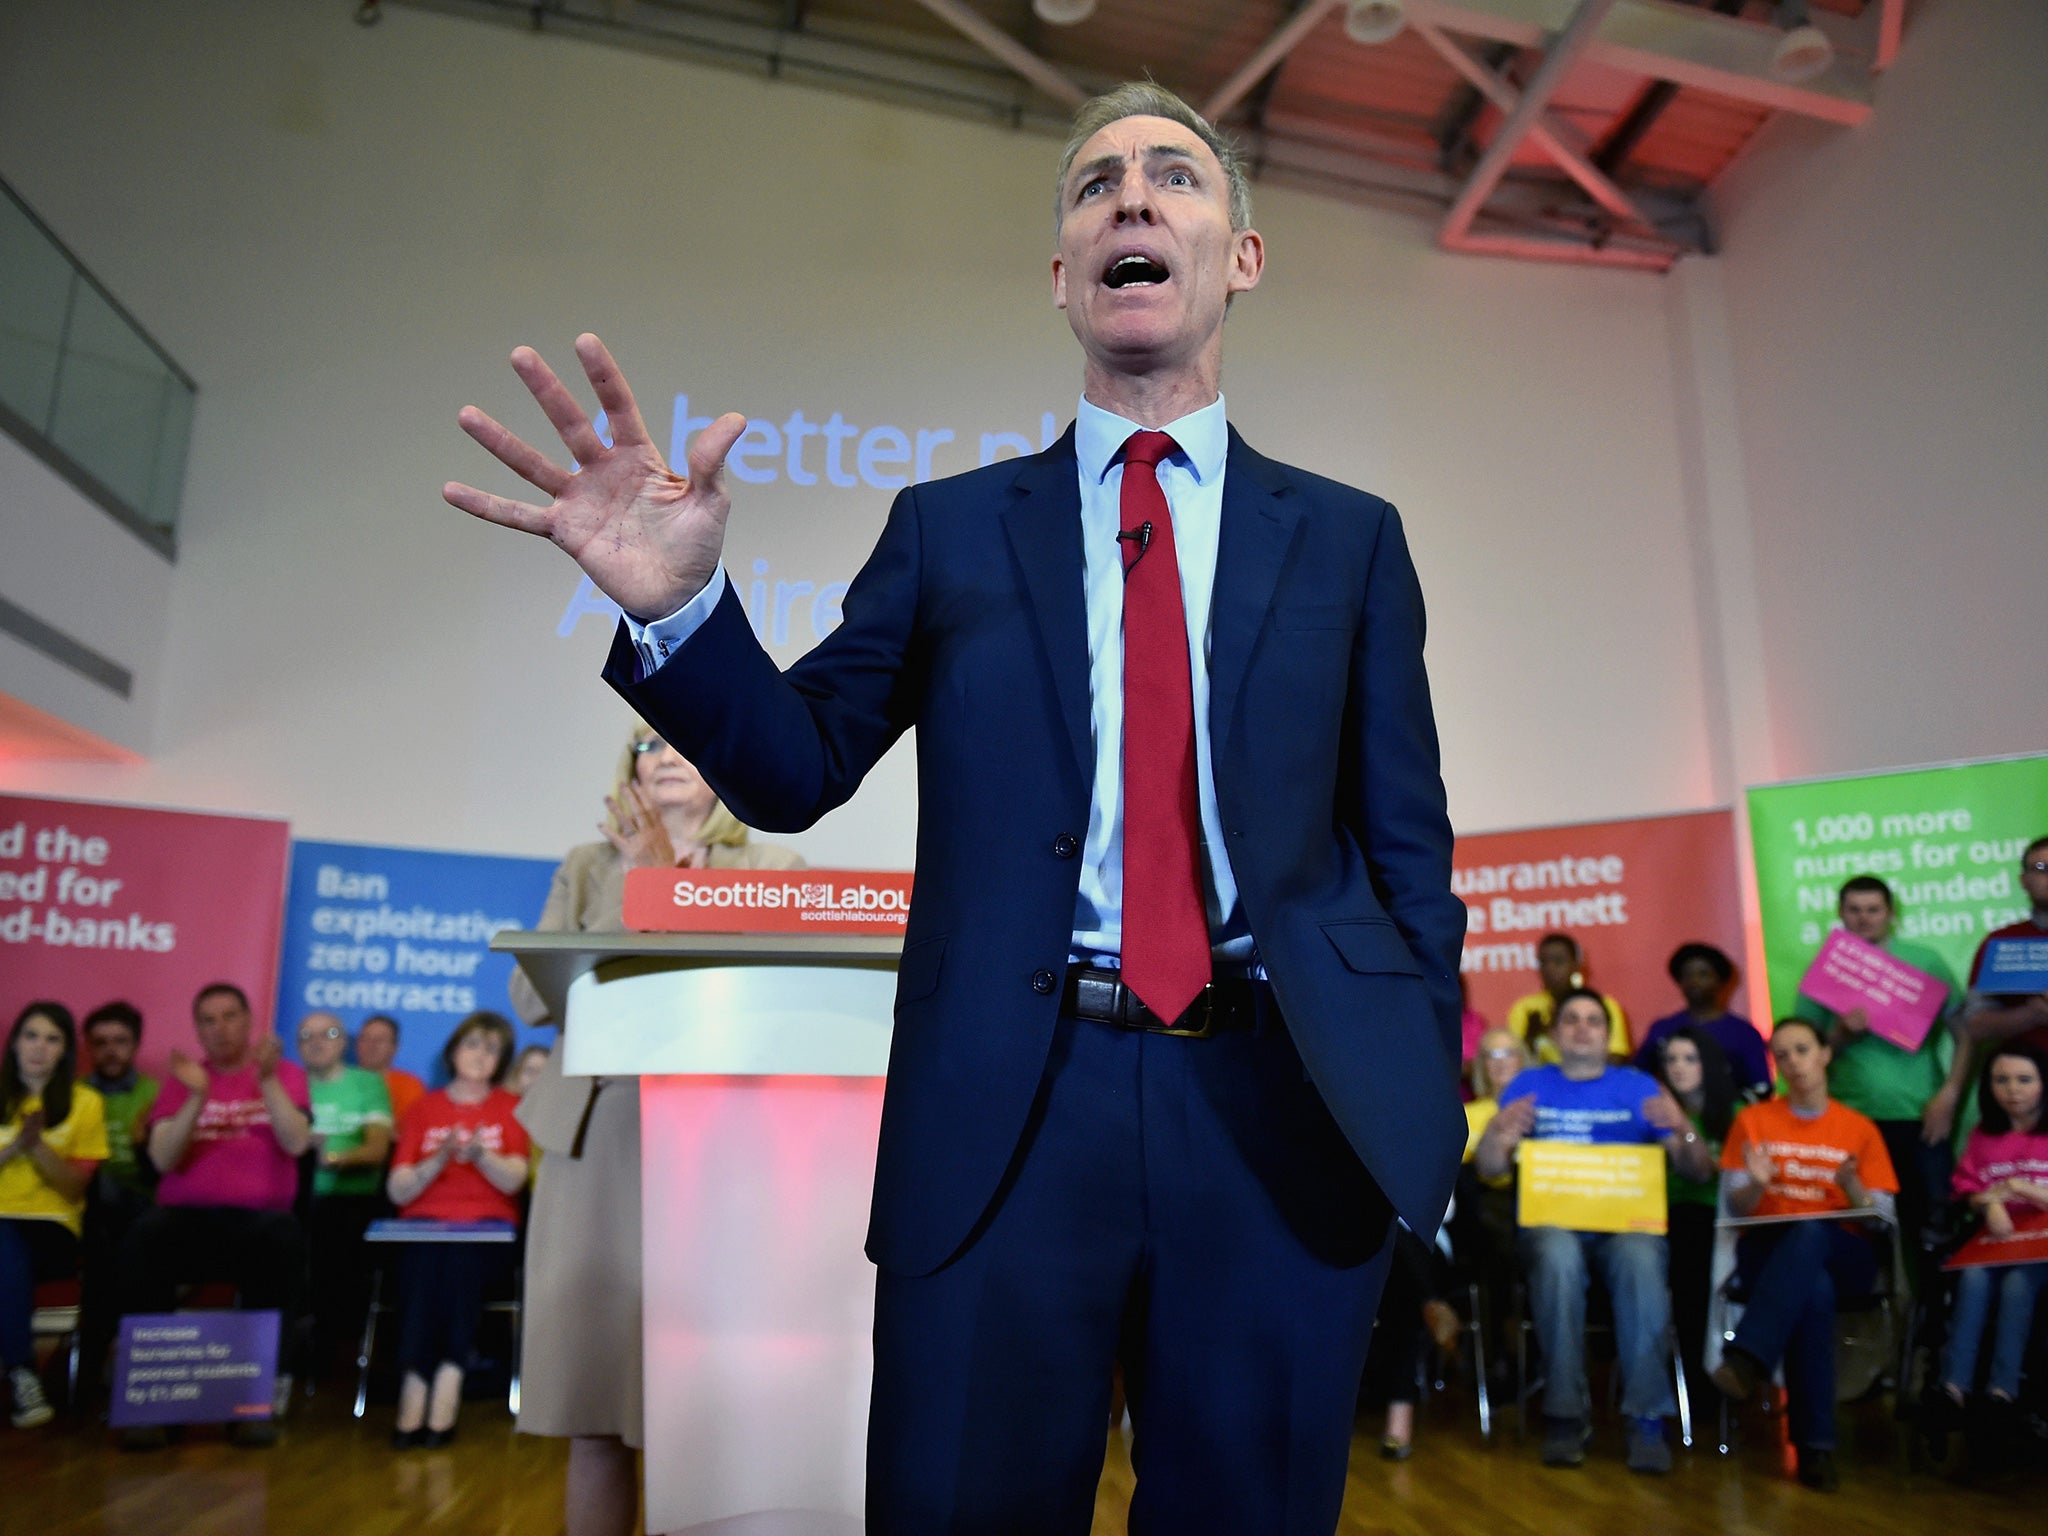 Labour’s Scottish leader has gone down-market and bare-knuckle in the build-up to the election